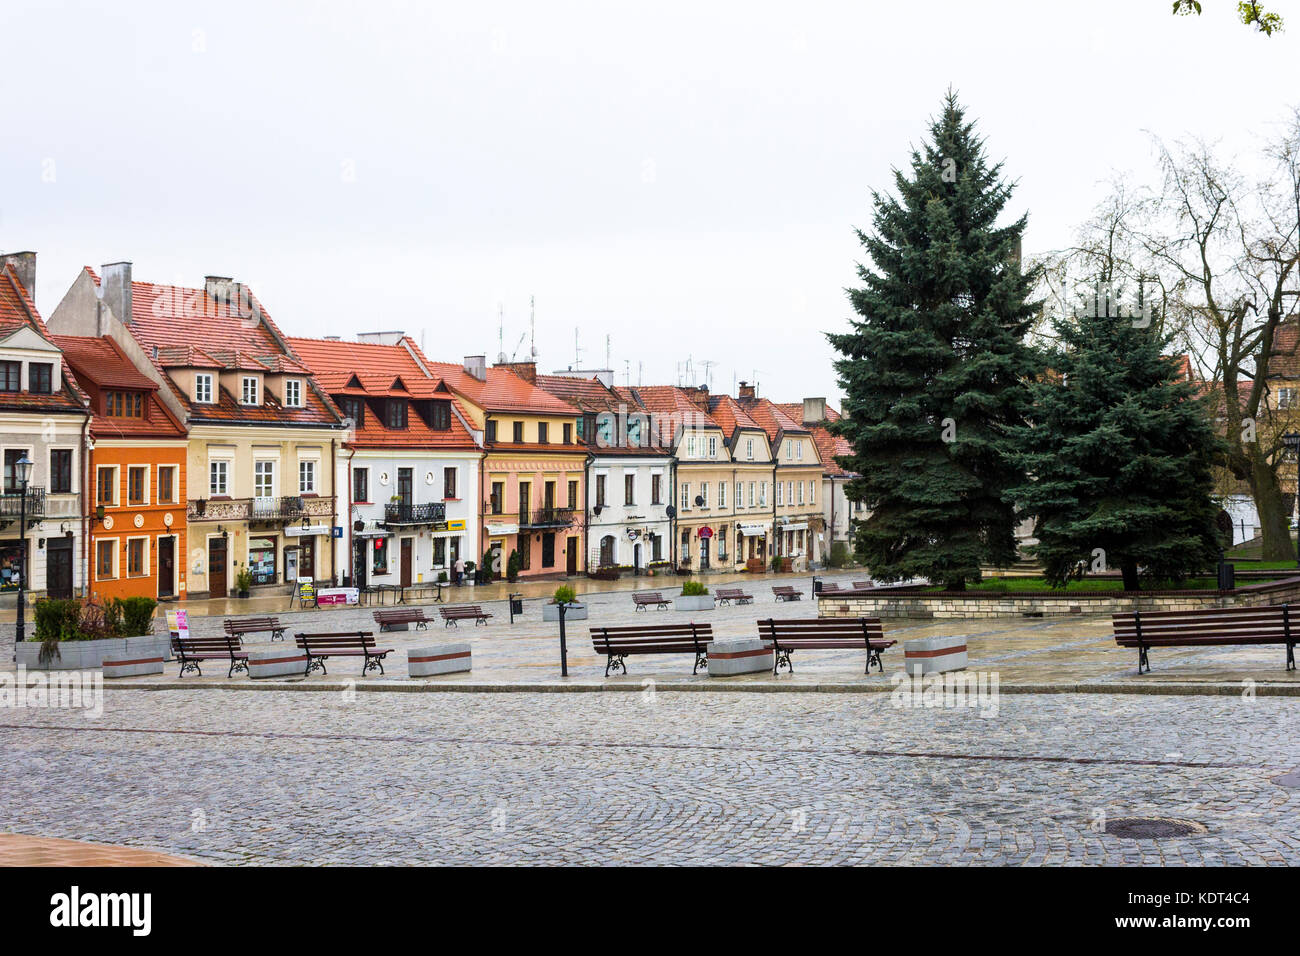 The old Market Place in Sandomierz, Poland, on a cloudy morning Stock Photo